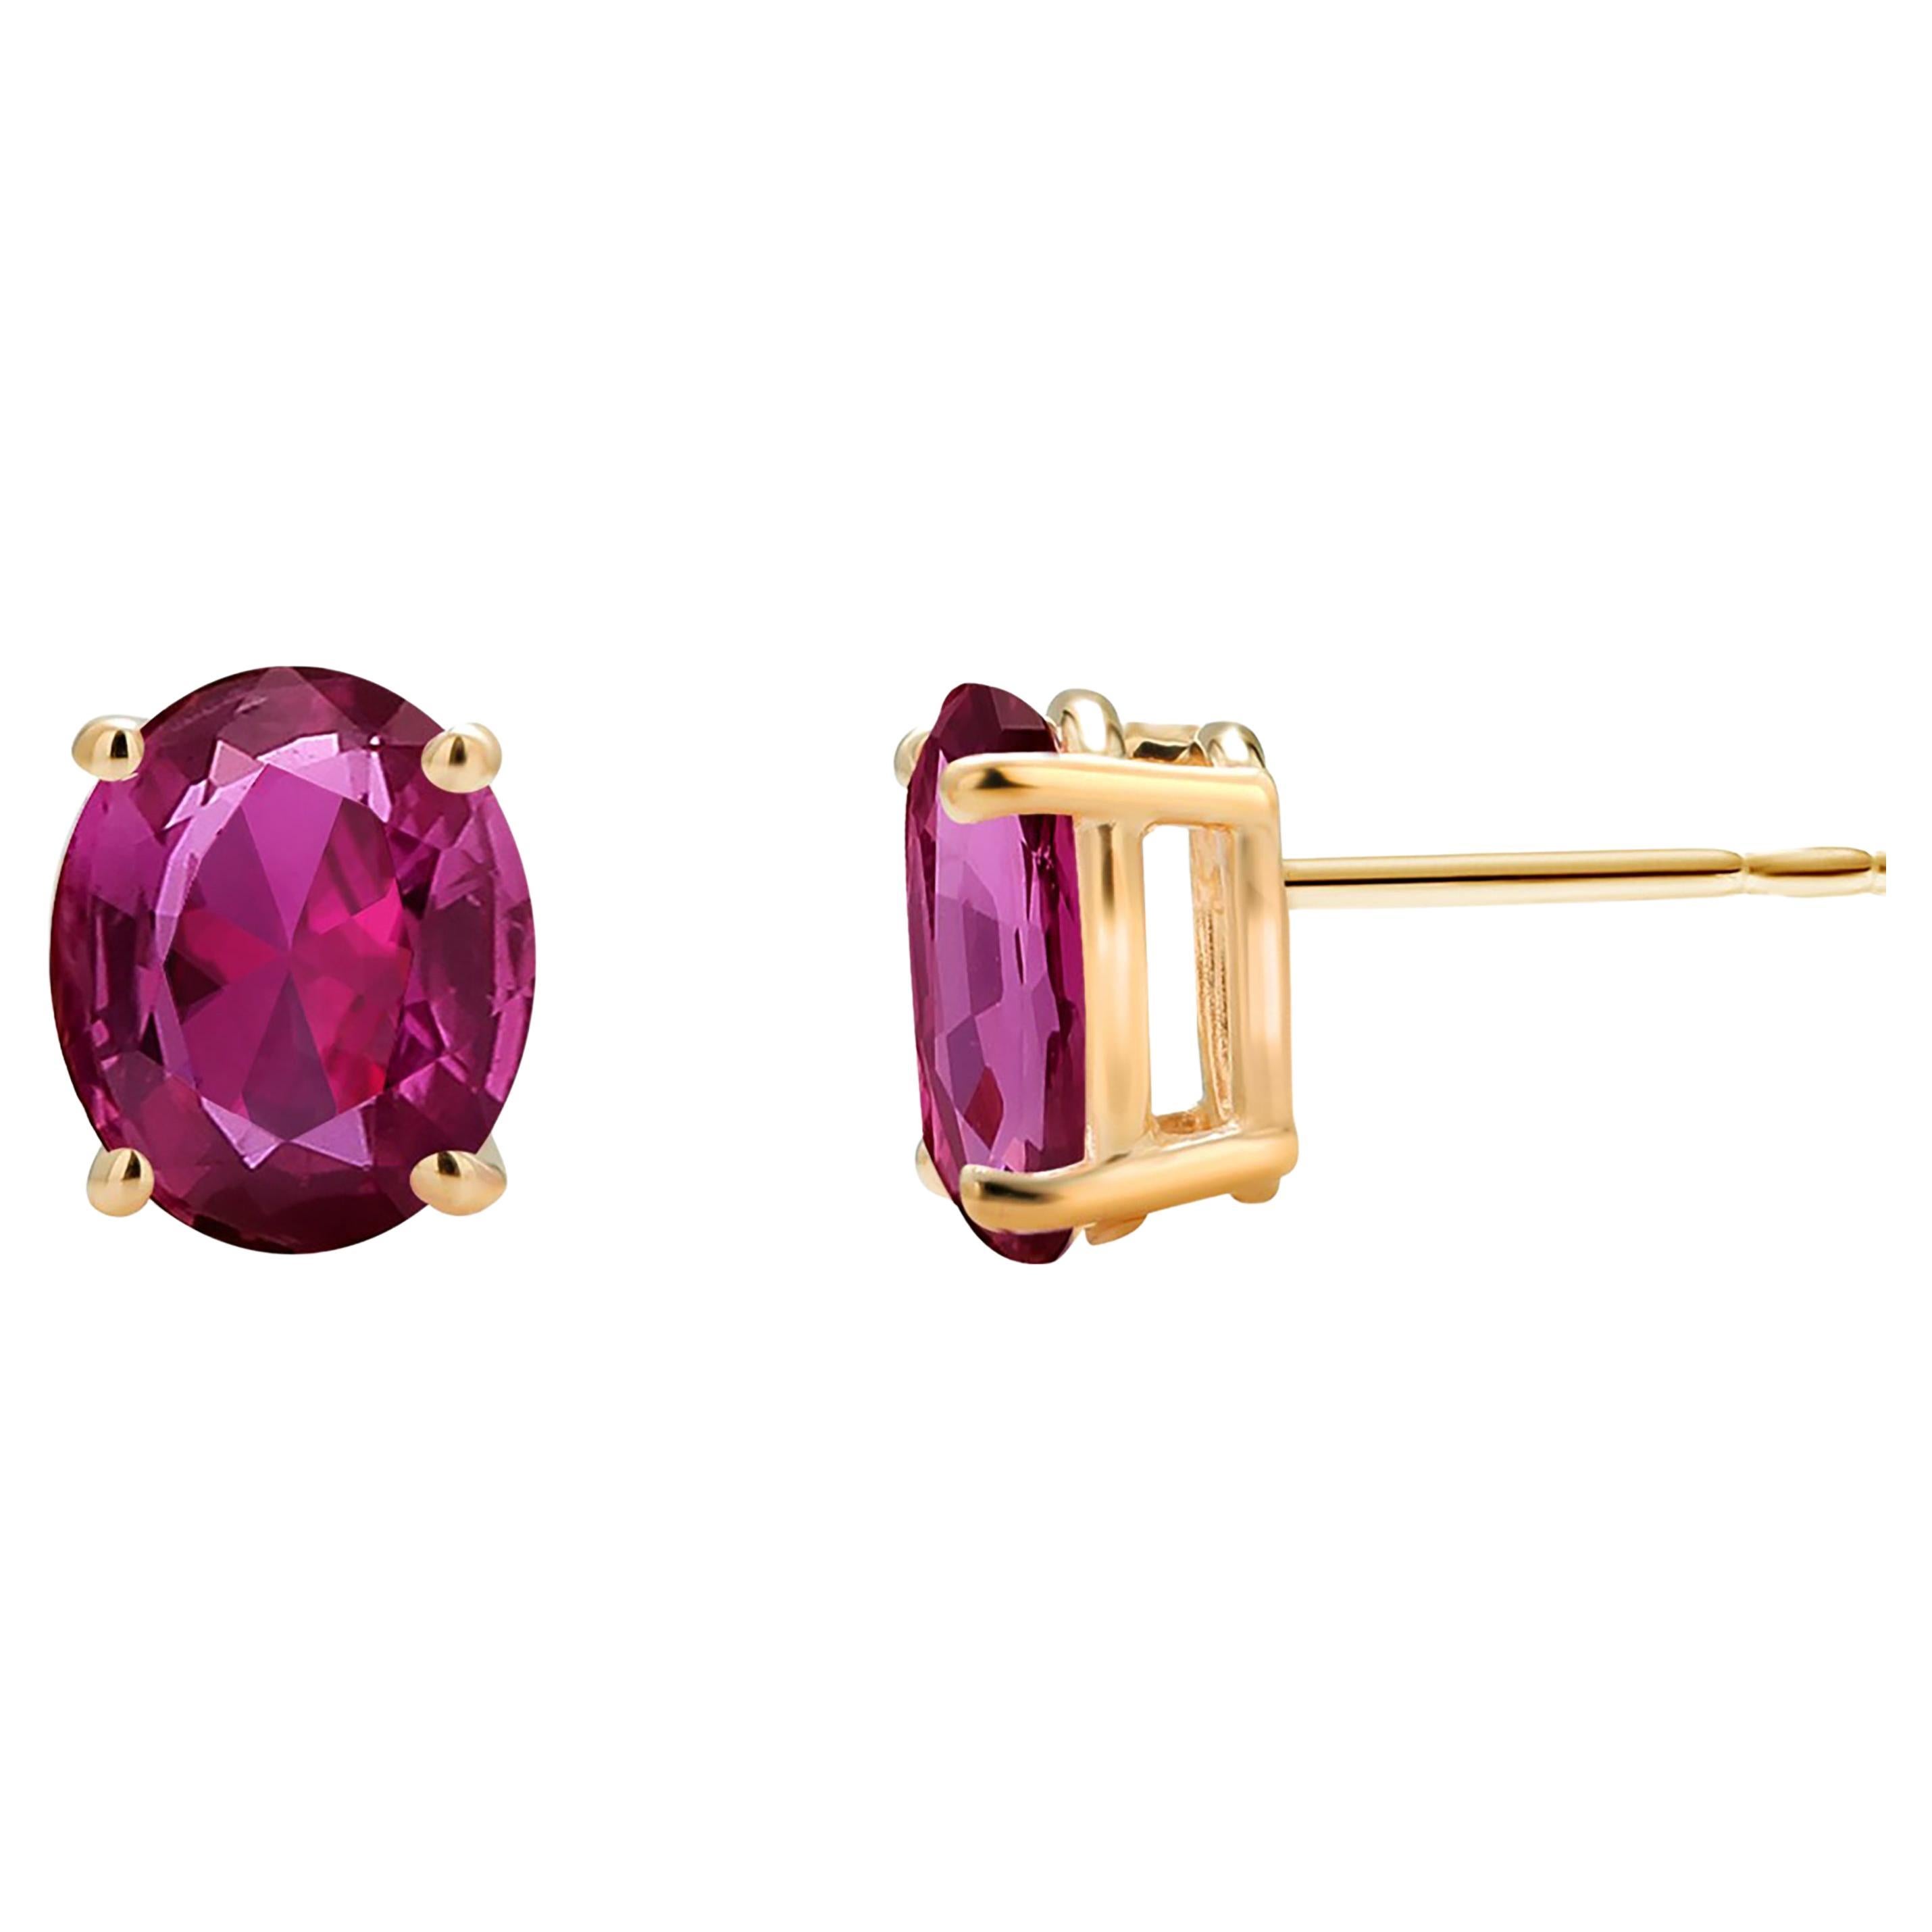 Oval Shaped Mini Rubies Set in Yellow Gold Stud Earrings For Sale